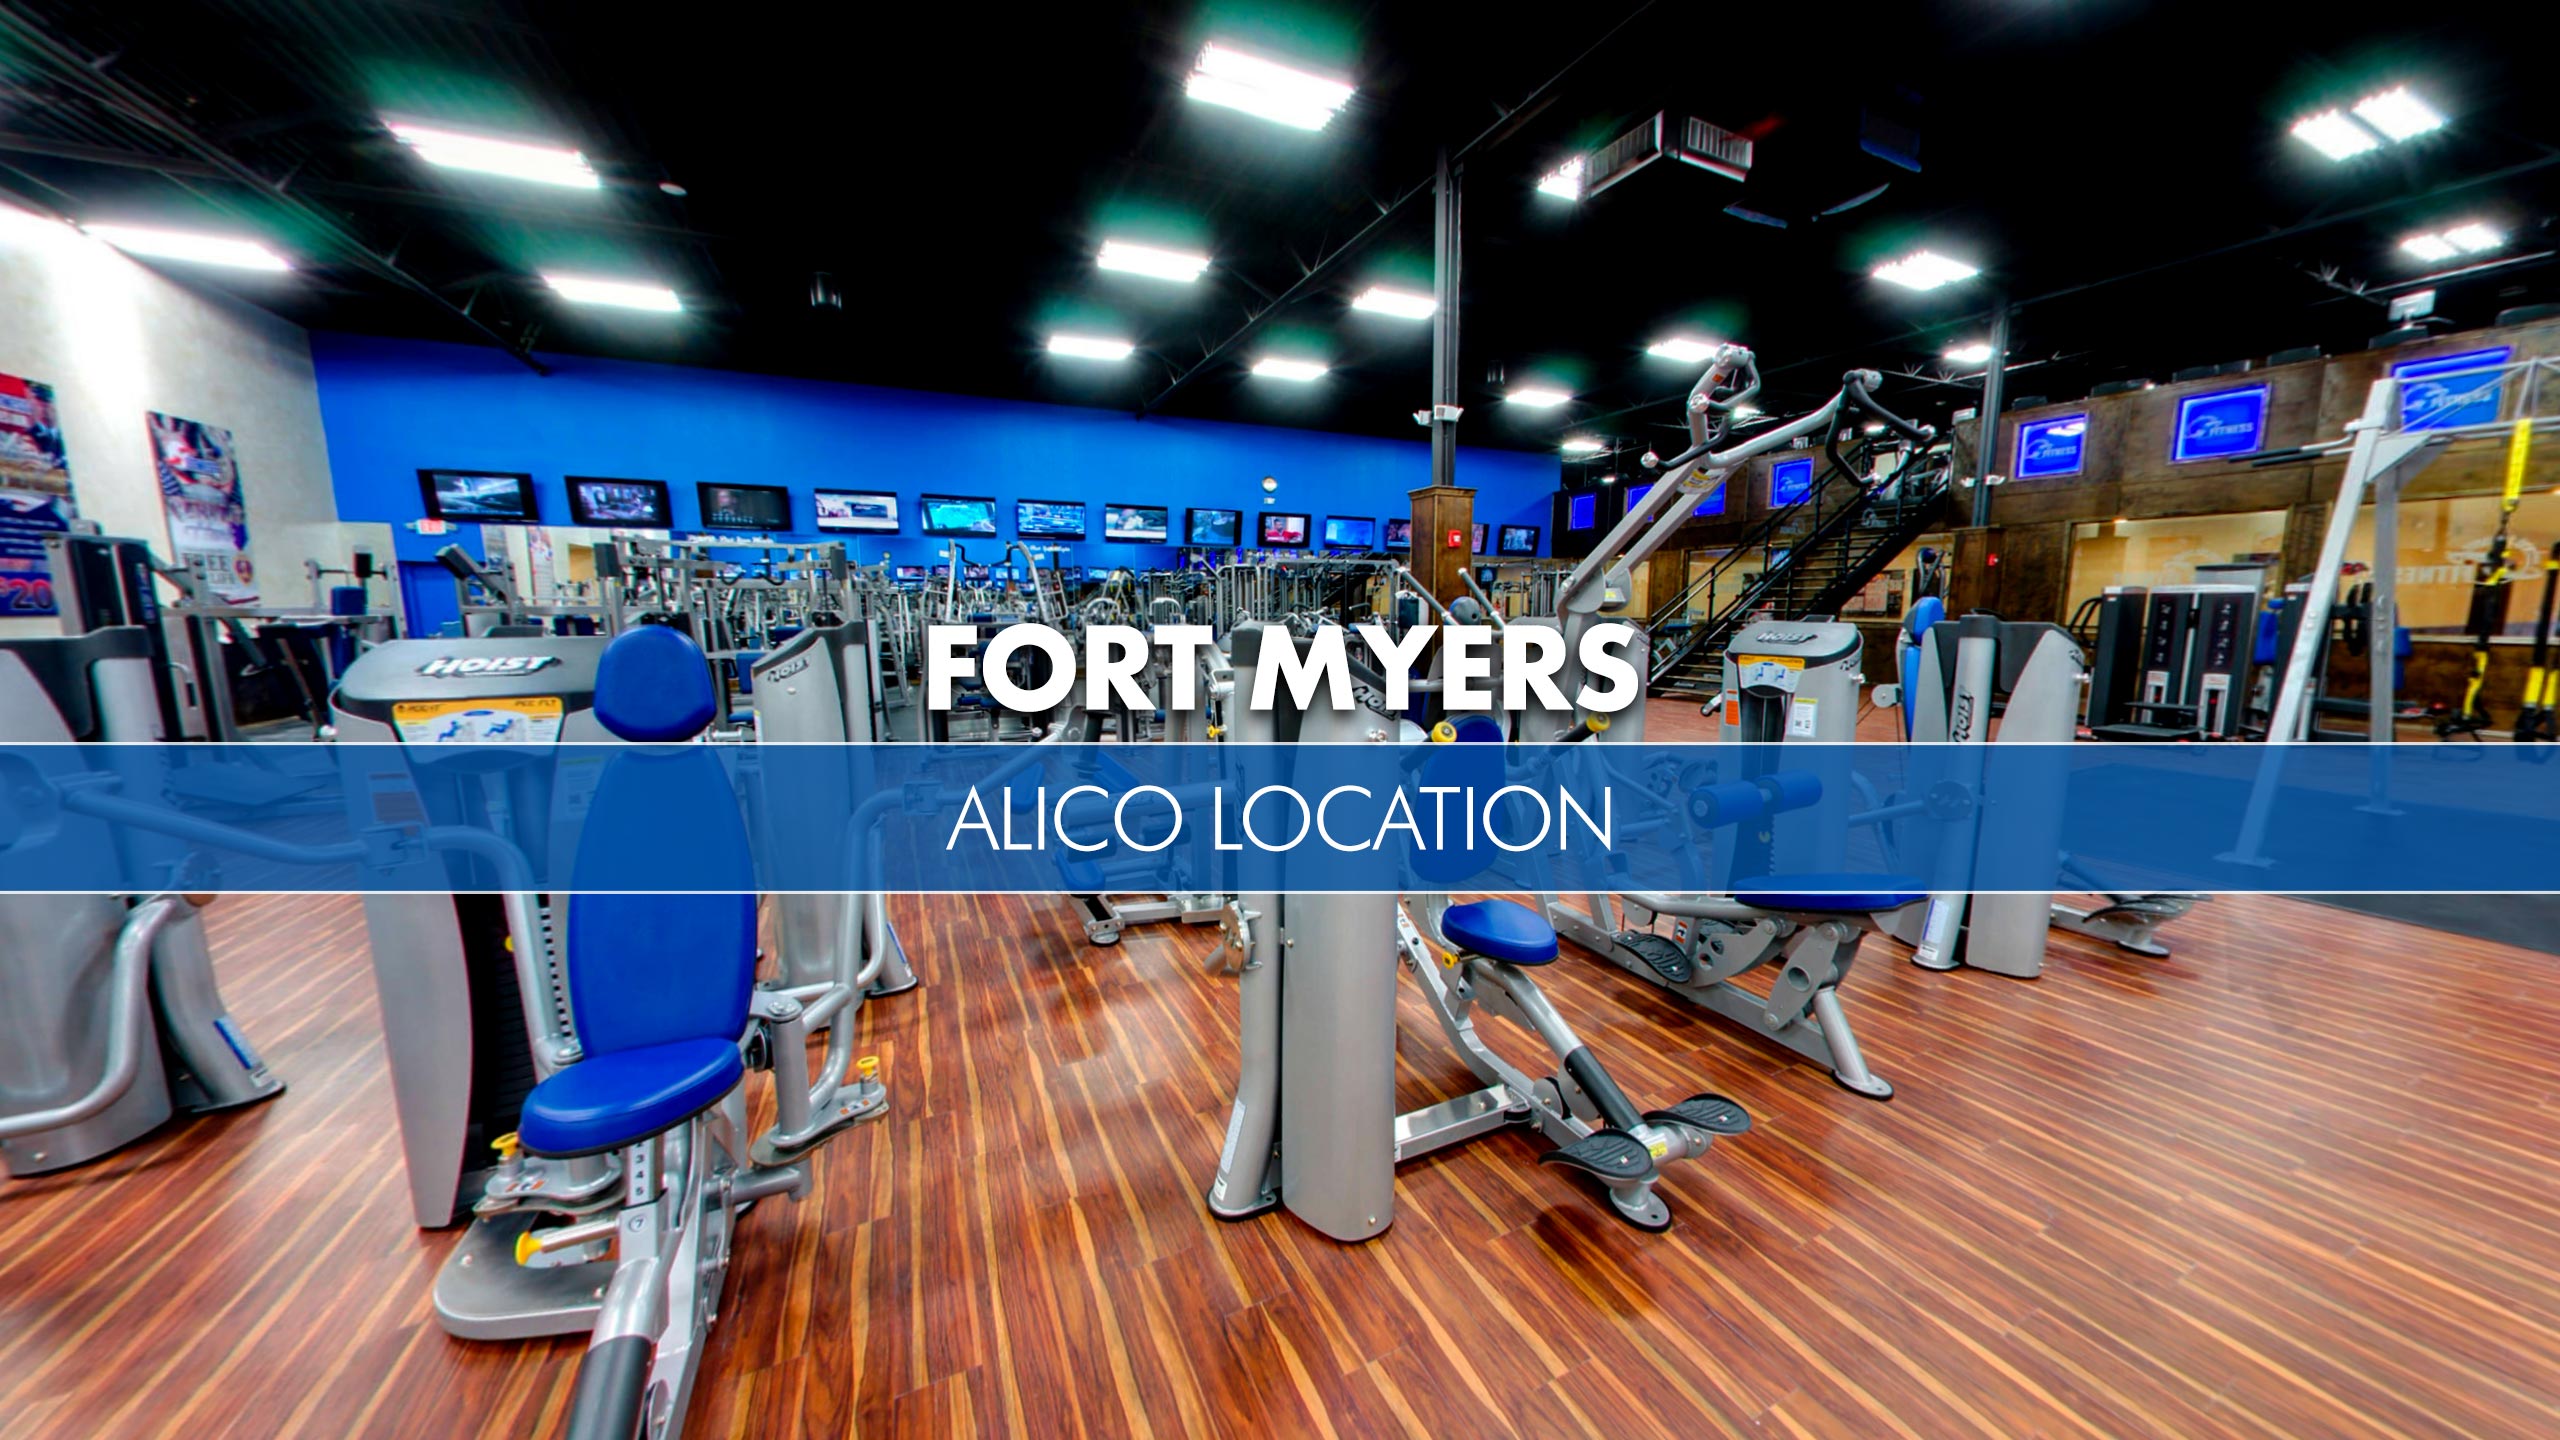 Fort Myers - Alico Location